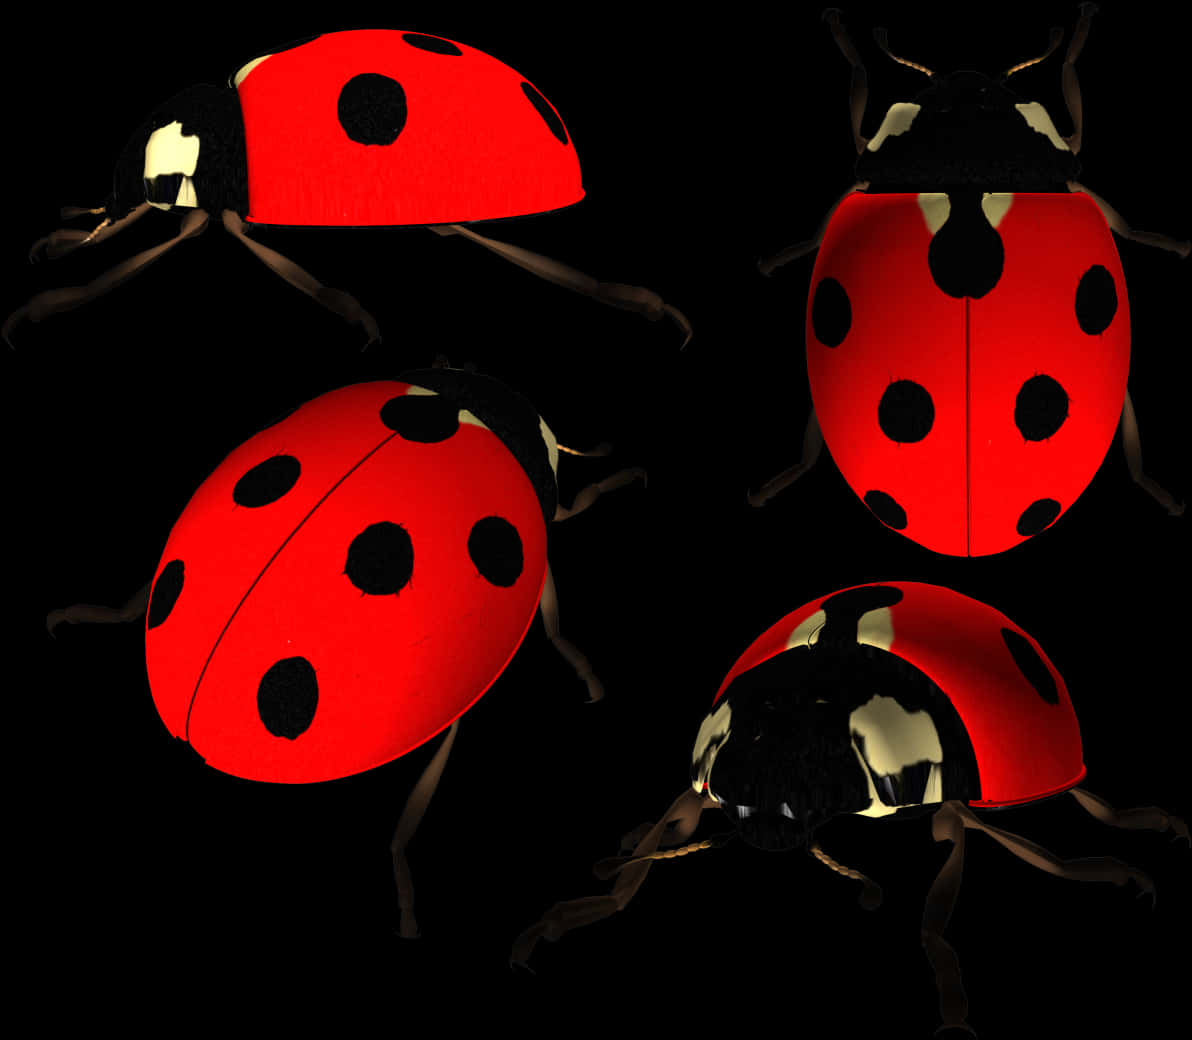 Four Ladybug Models In Different Positions